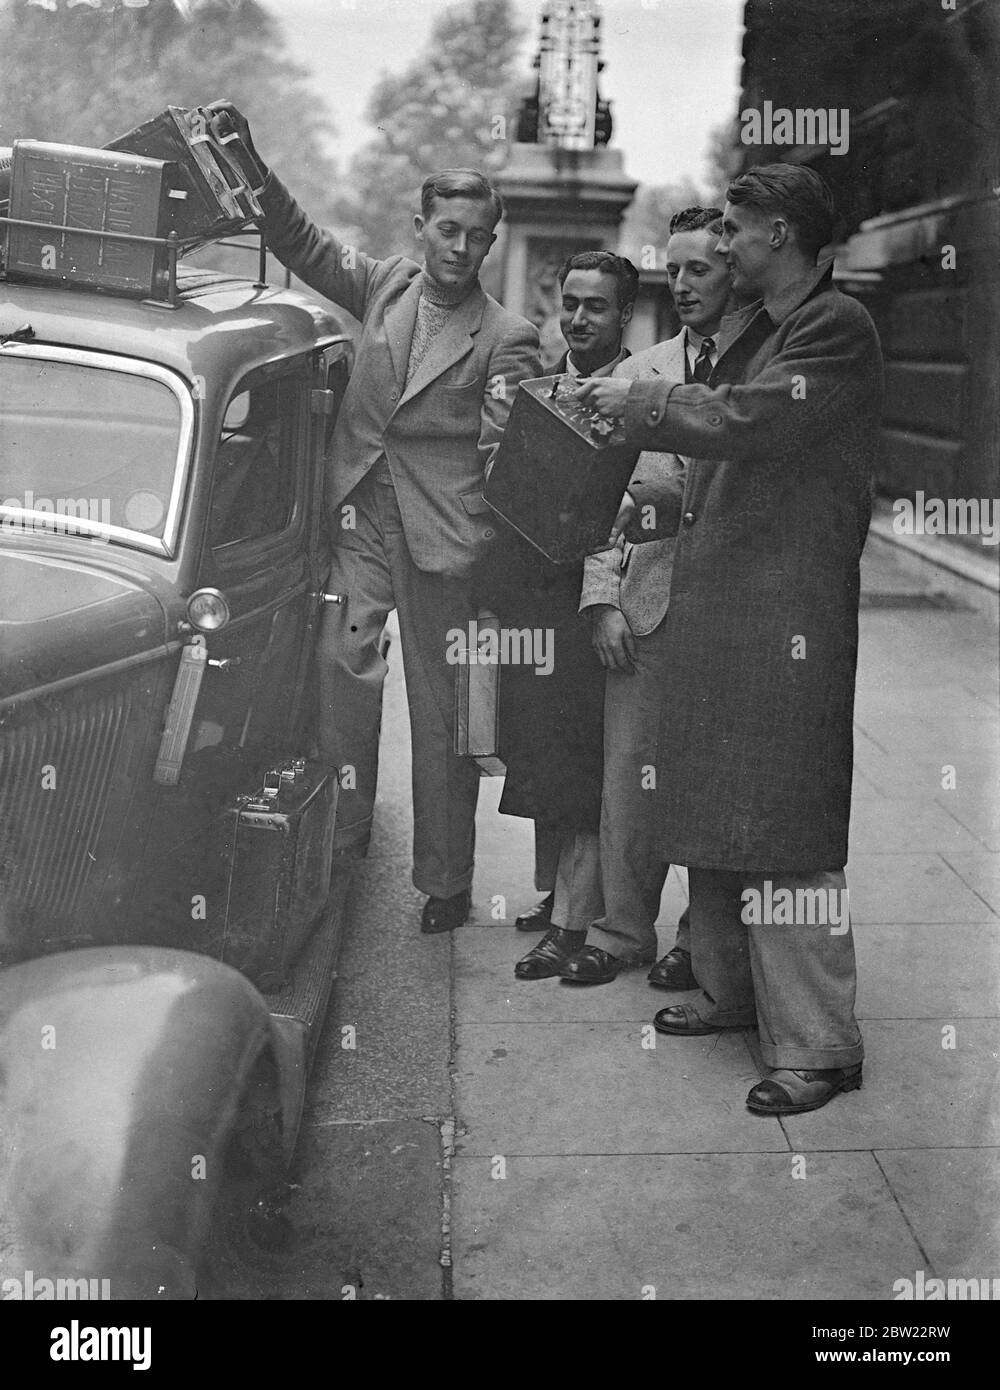 Four English boys began their new career in adventurous style when they left the India Office in London to travel by car all the way to Calcutta take up positions in the Indian Civil Service. The four boys: A W Flack, T. N. Kaul, F. A. Sharpe and P. F. Adams loading their car with petrol before leaving London. 21 September 1937. Stock Photo